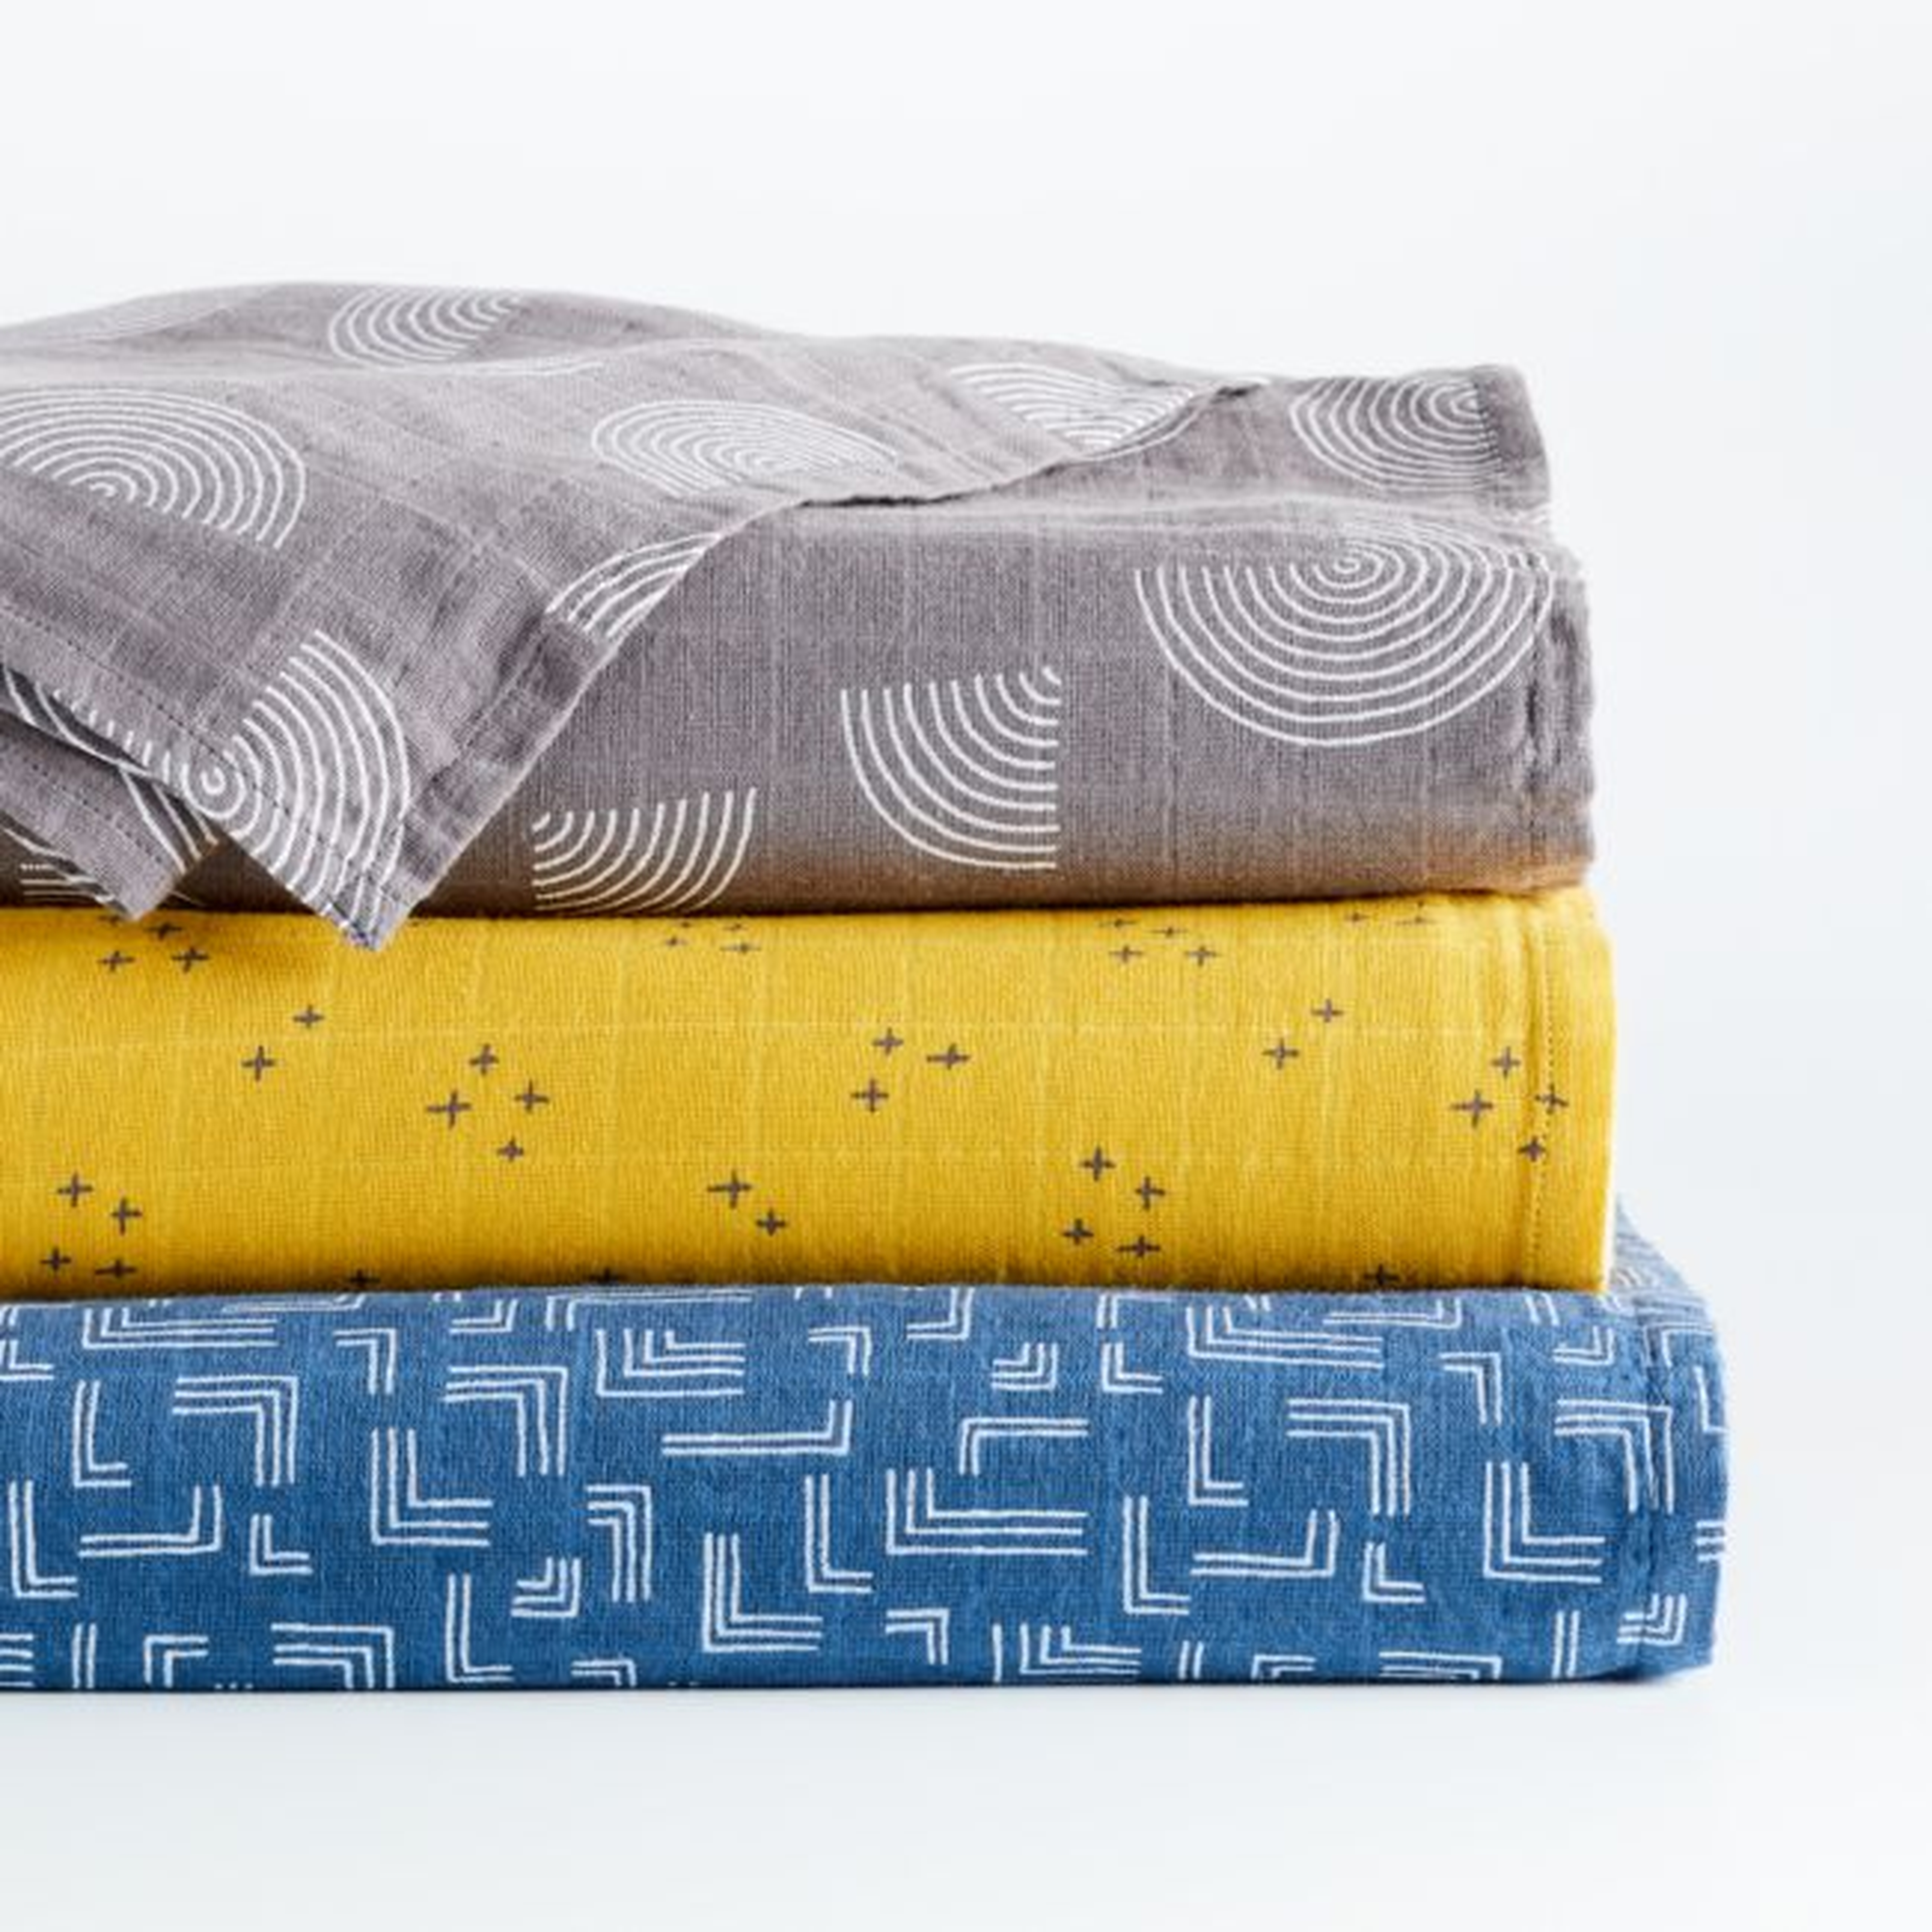 Blue Modern Organic Baby Swaddle Blankets, Set of 3 - Crate and Barrel